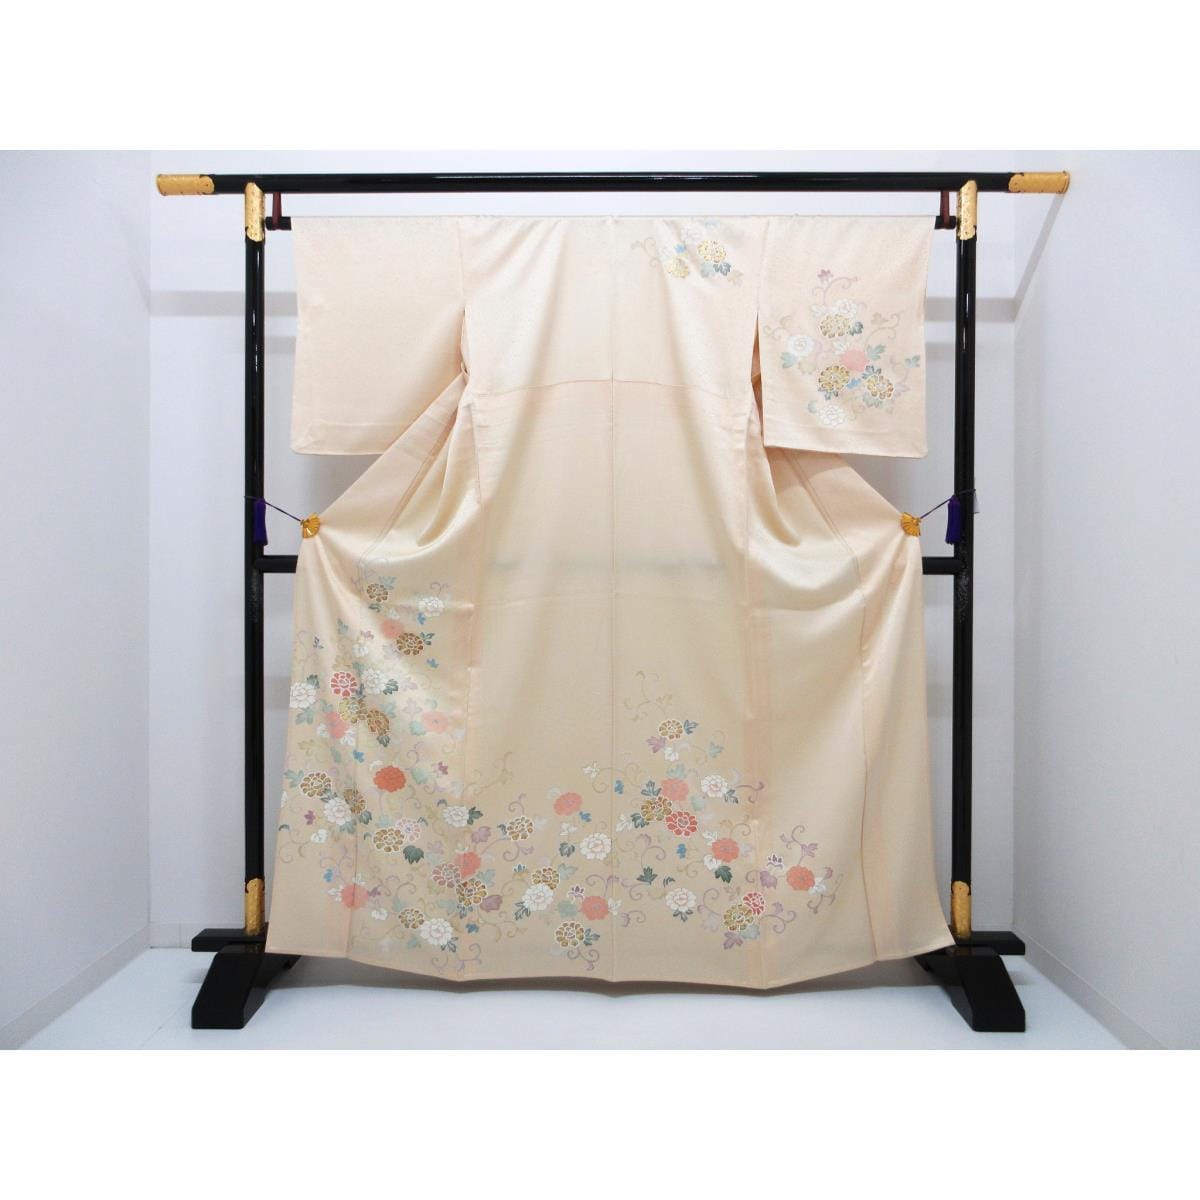 Single layer formal kimono with gold embroidery and Yuzen pattern